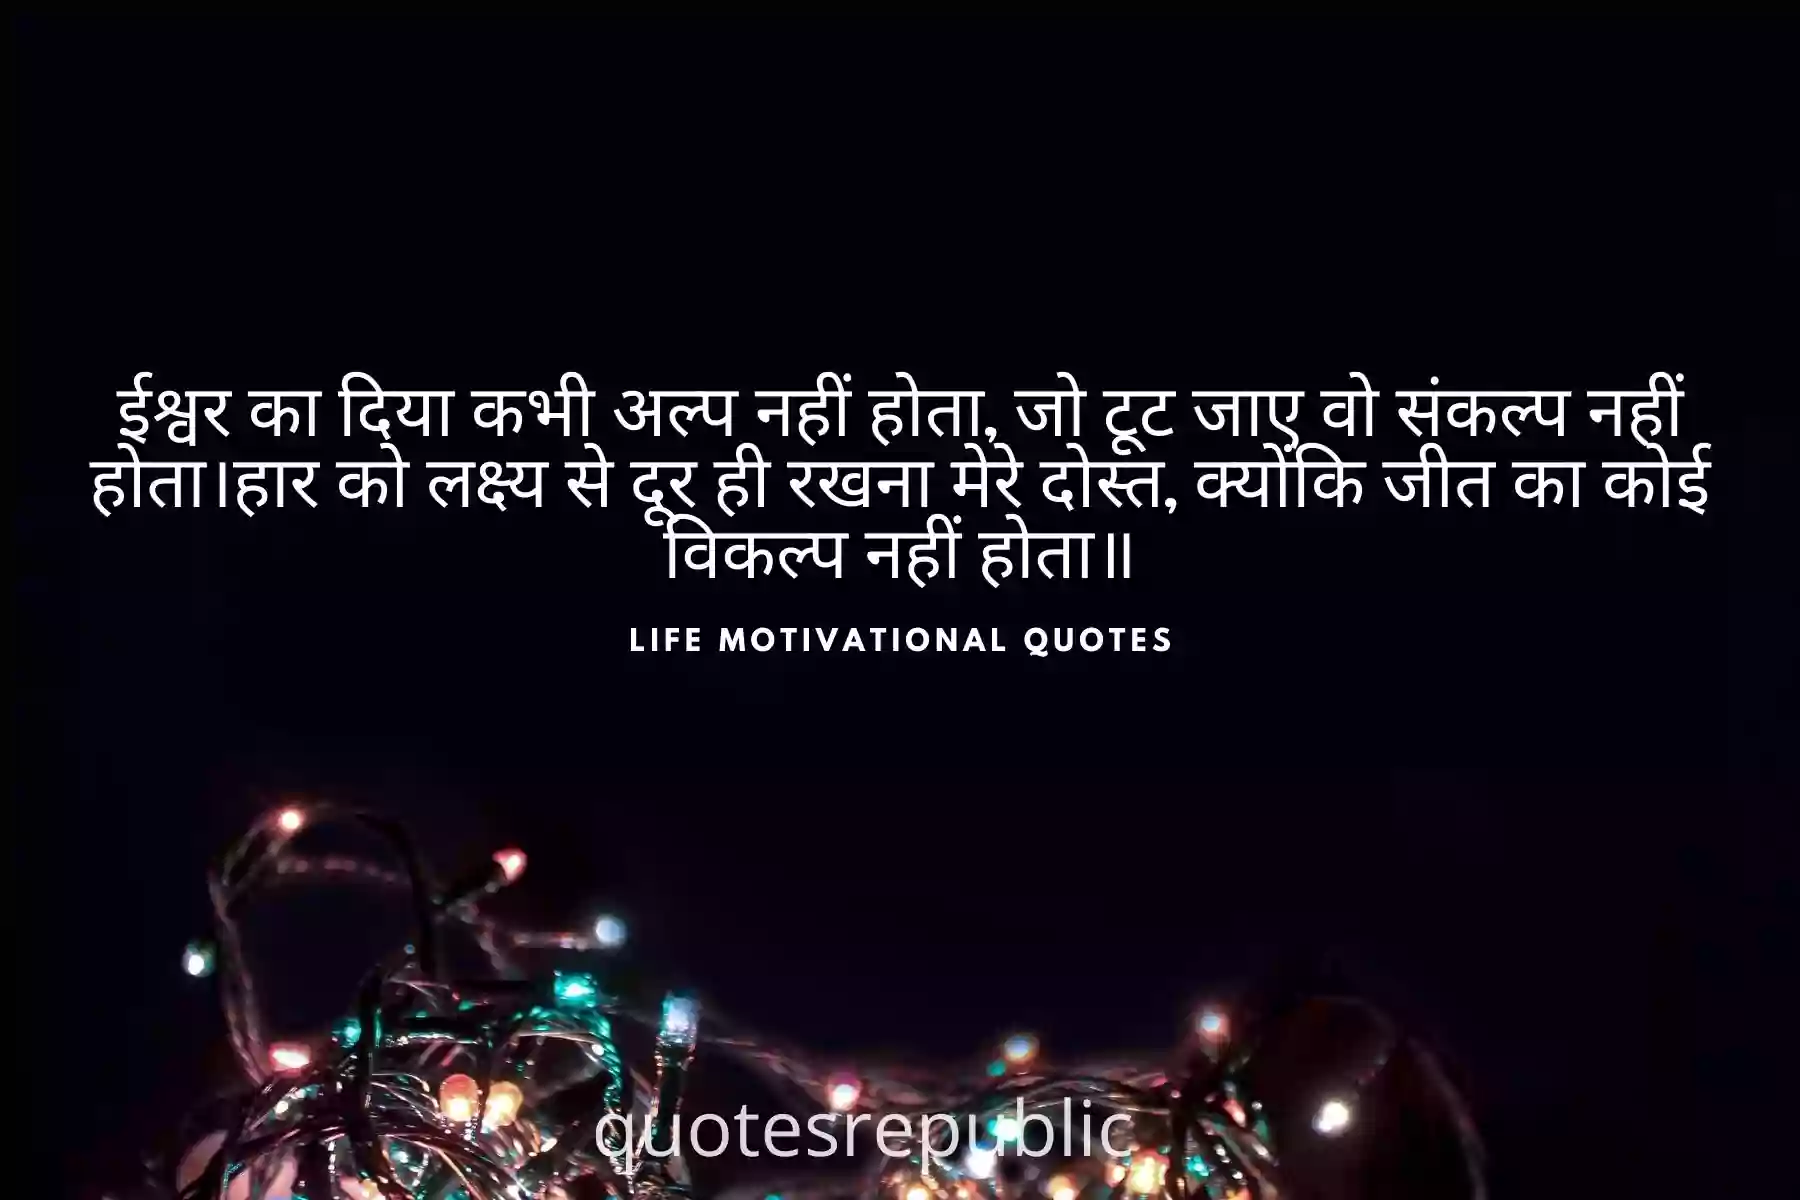 Motivational Life Quotes In Hindi